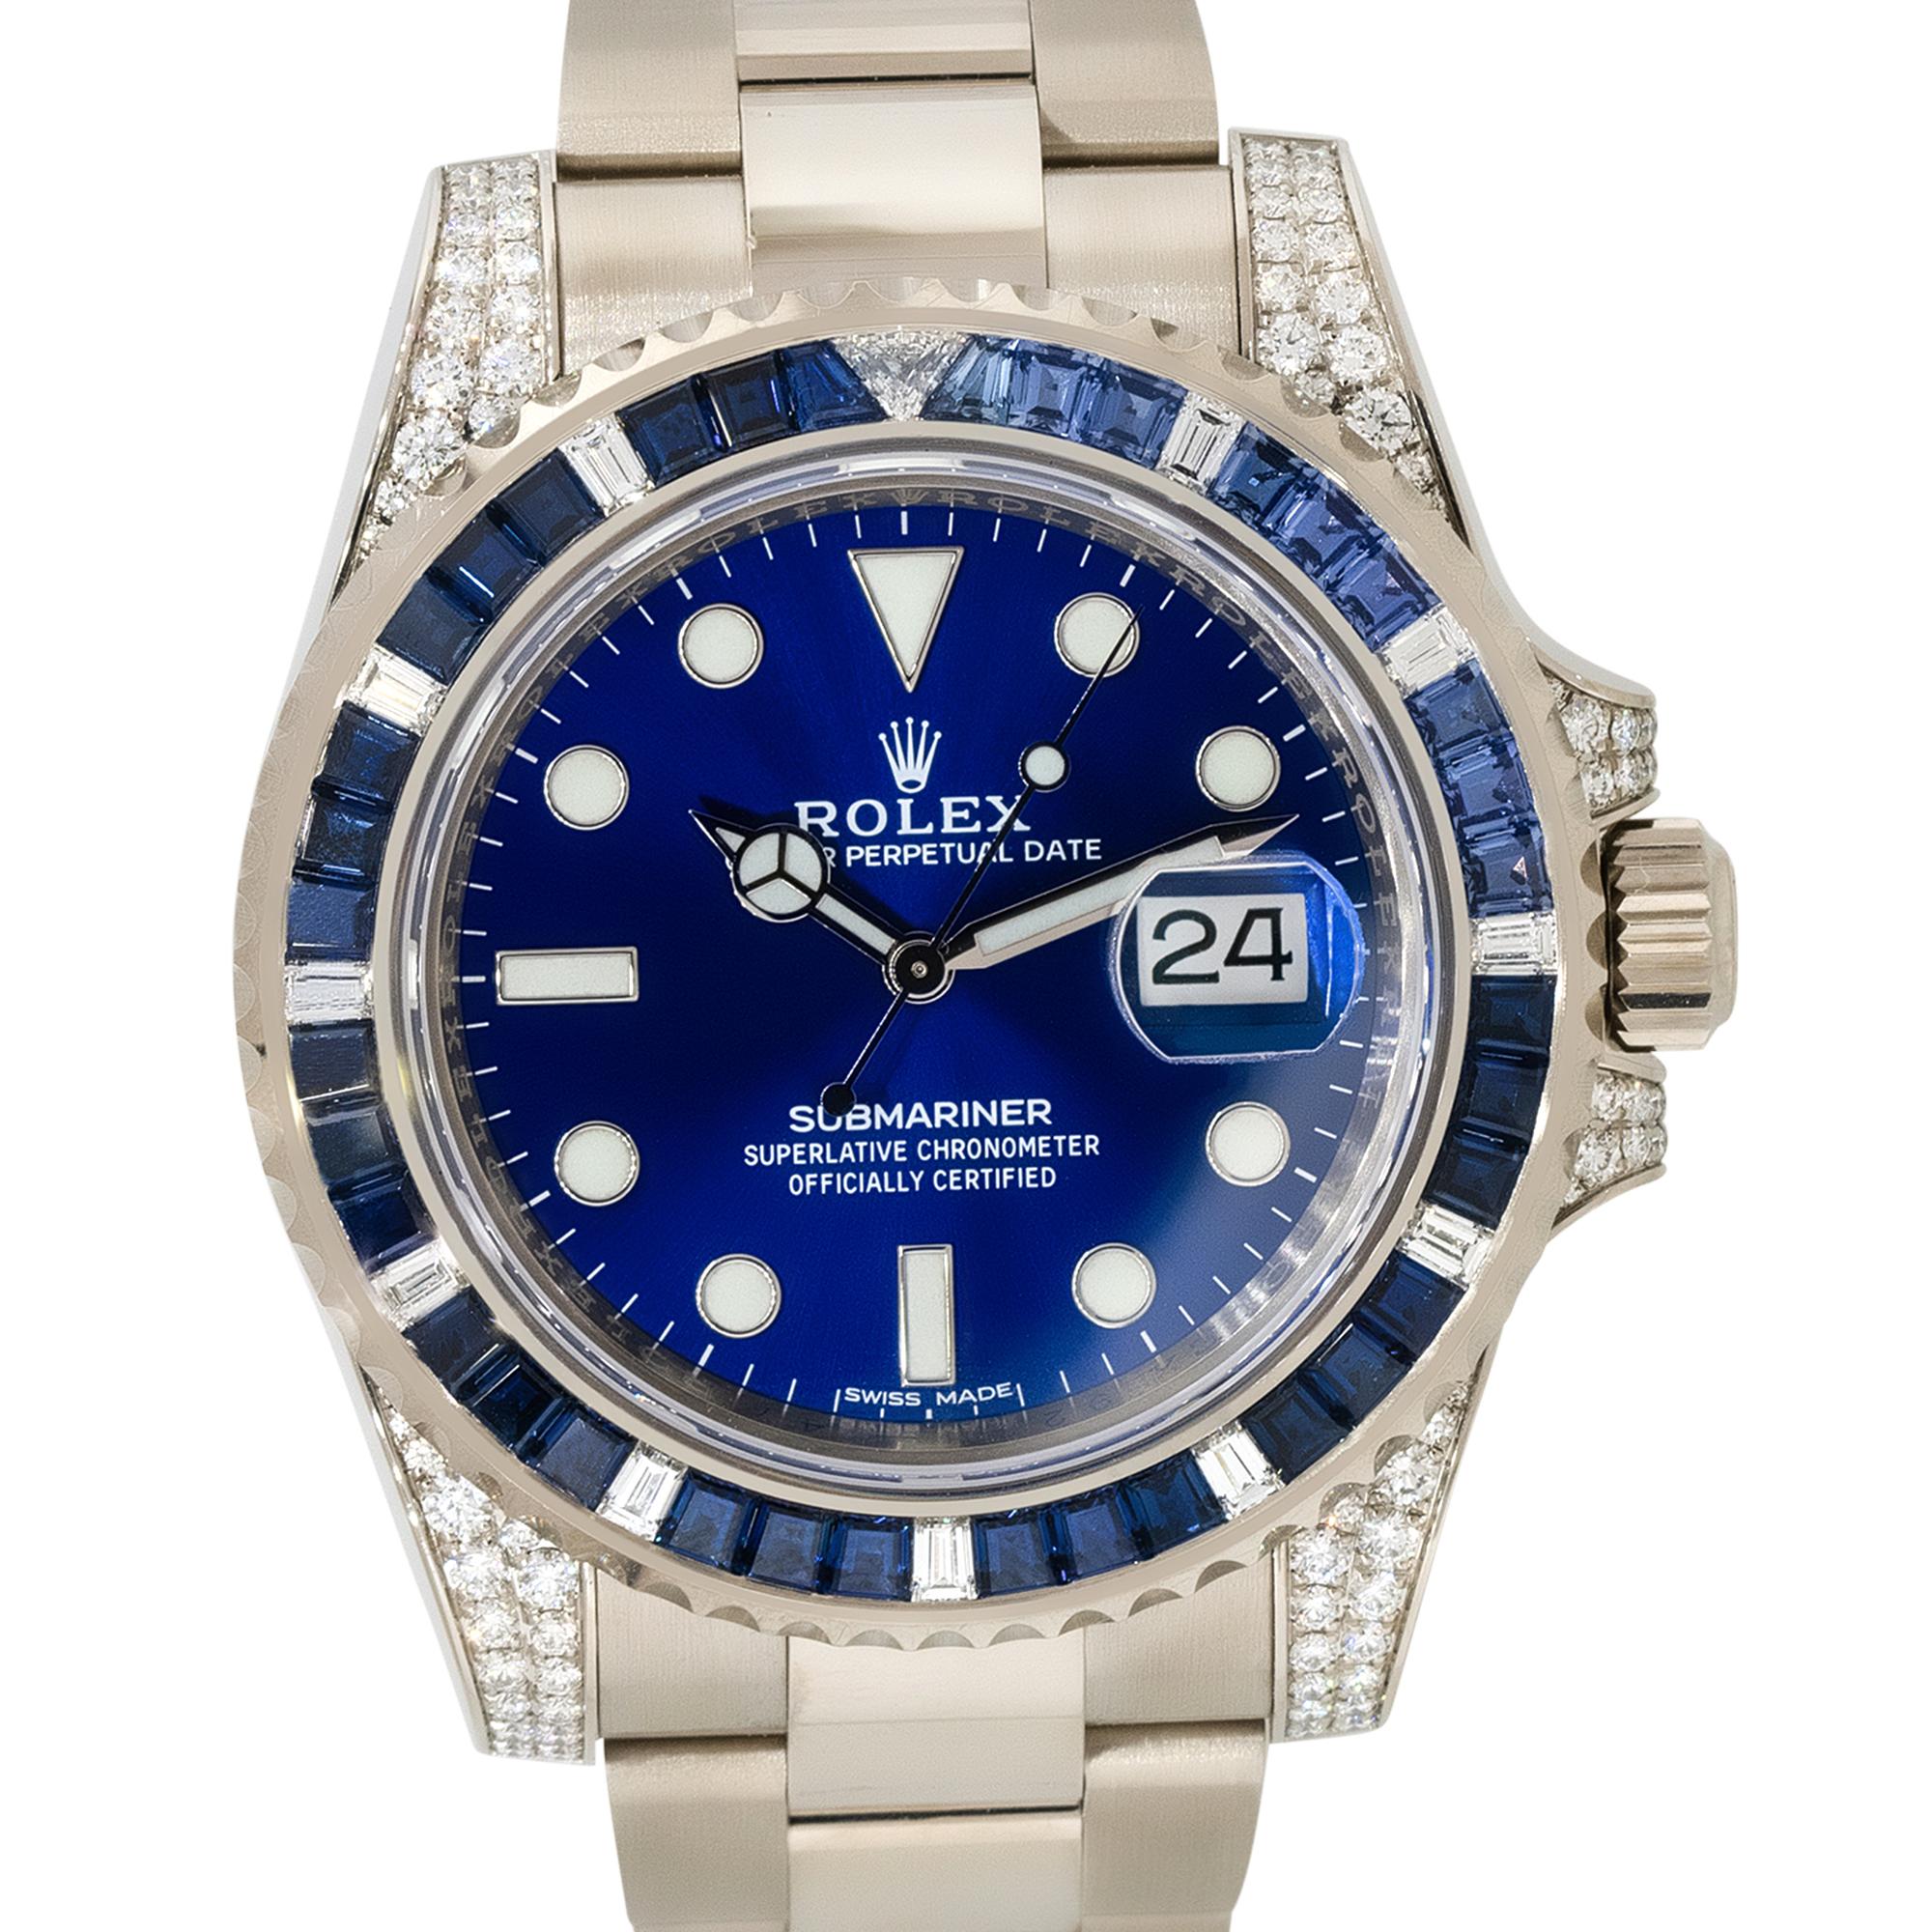 Brand: Rolex
MPN: 116659SABR
Model: Submariner
Case Material: 18k White Gold with Diamonds
Case Diameter: 40mm
Crystal: Sapphire crystal 
Bezel: Unidirectional 18k white gold bezel with sapphire stones
Dial: Blue dial with luminescent hands and hour